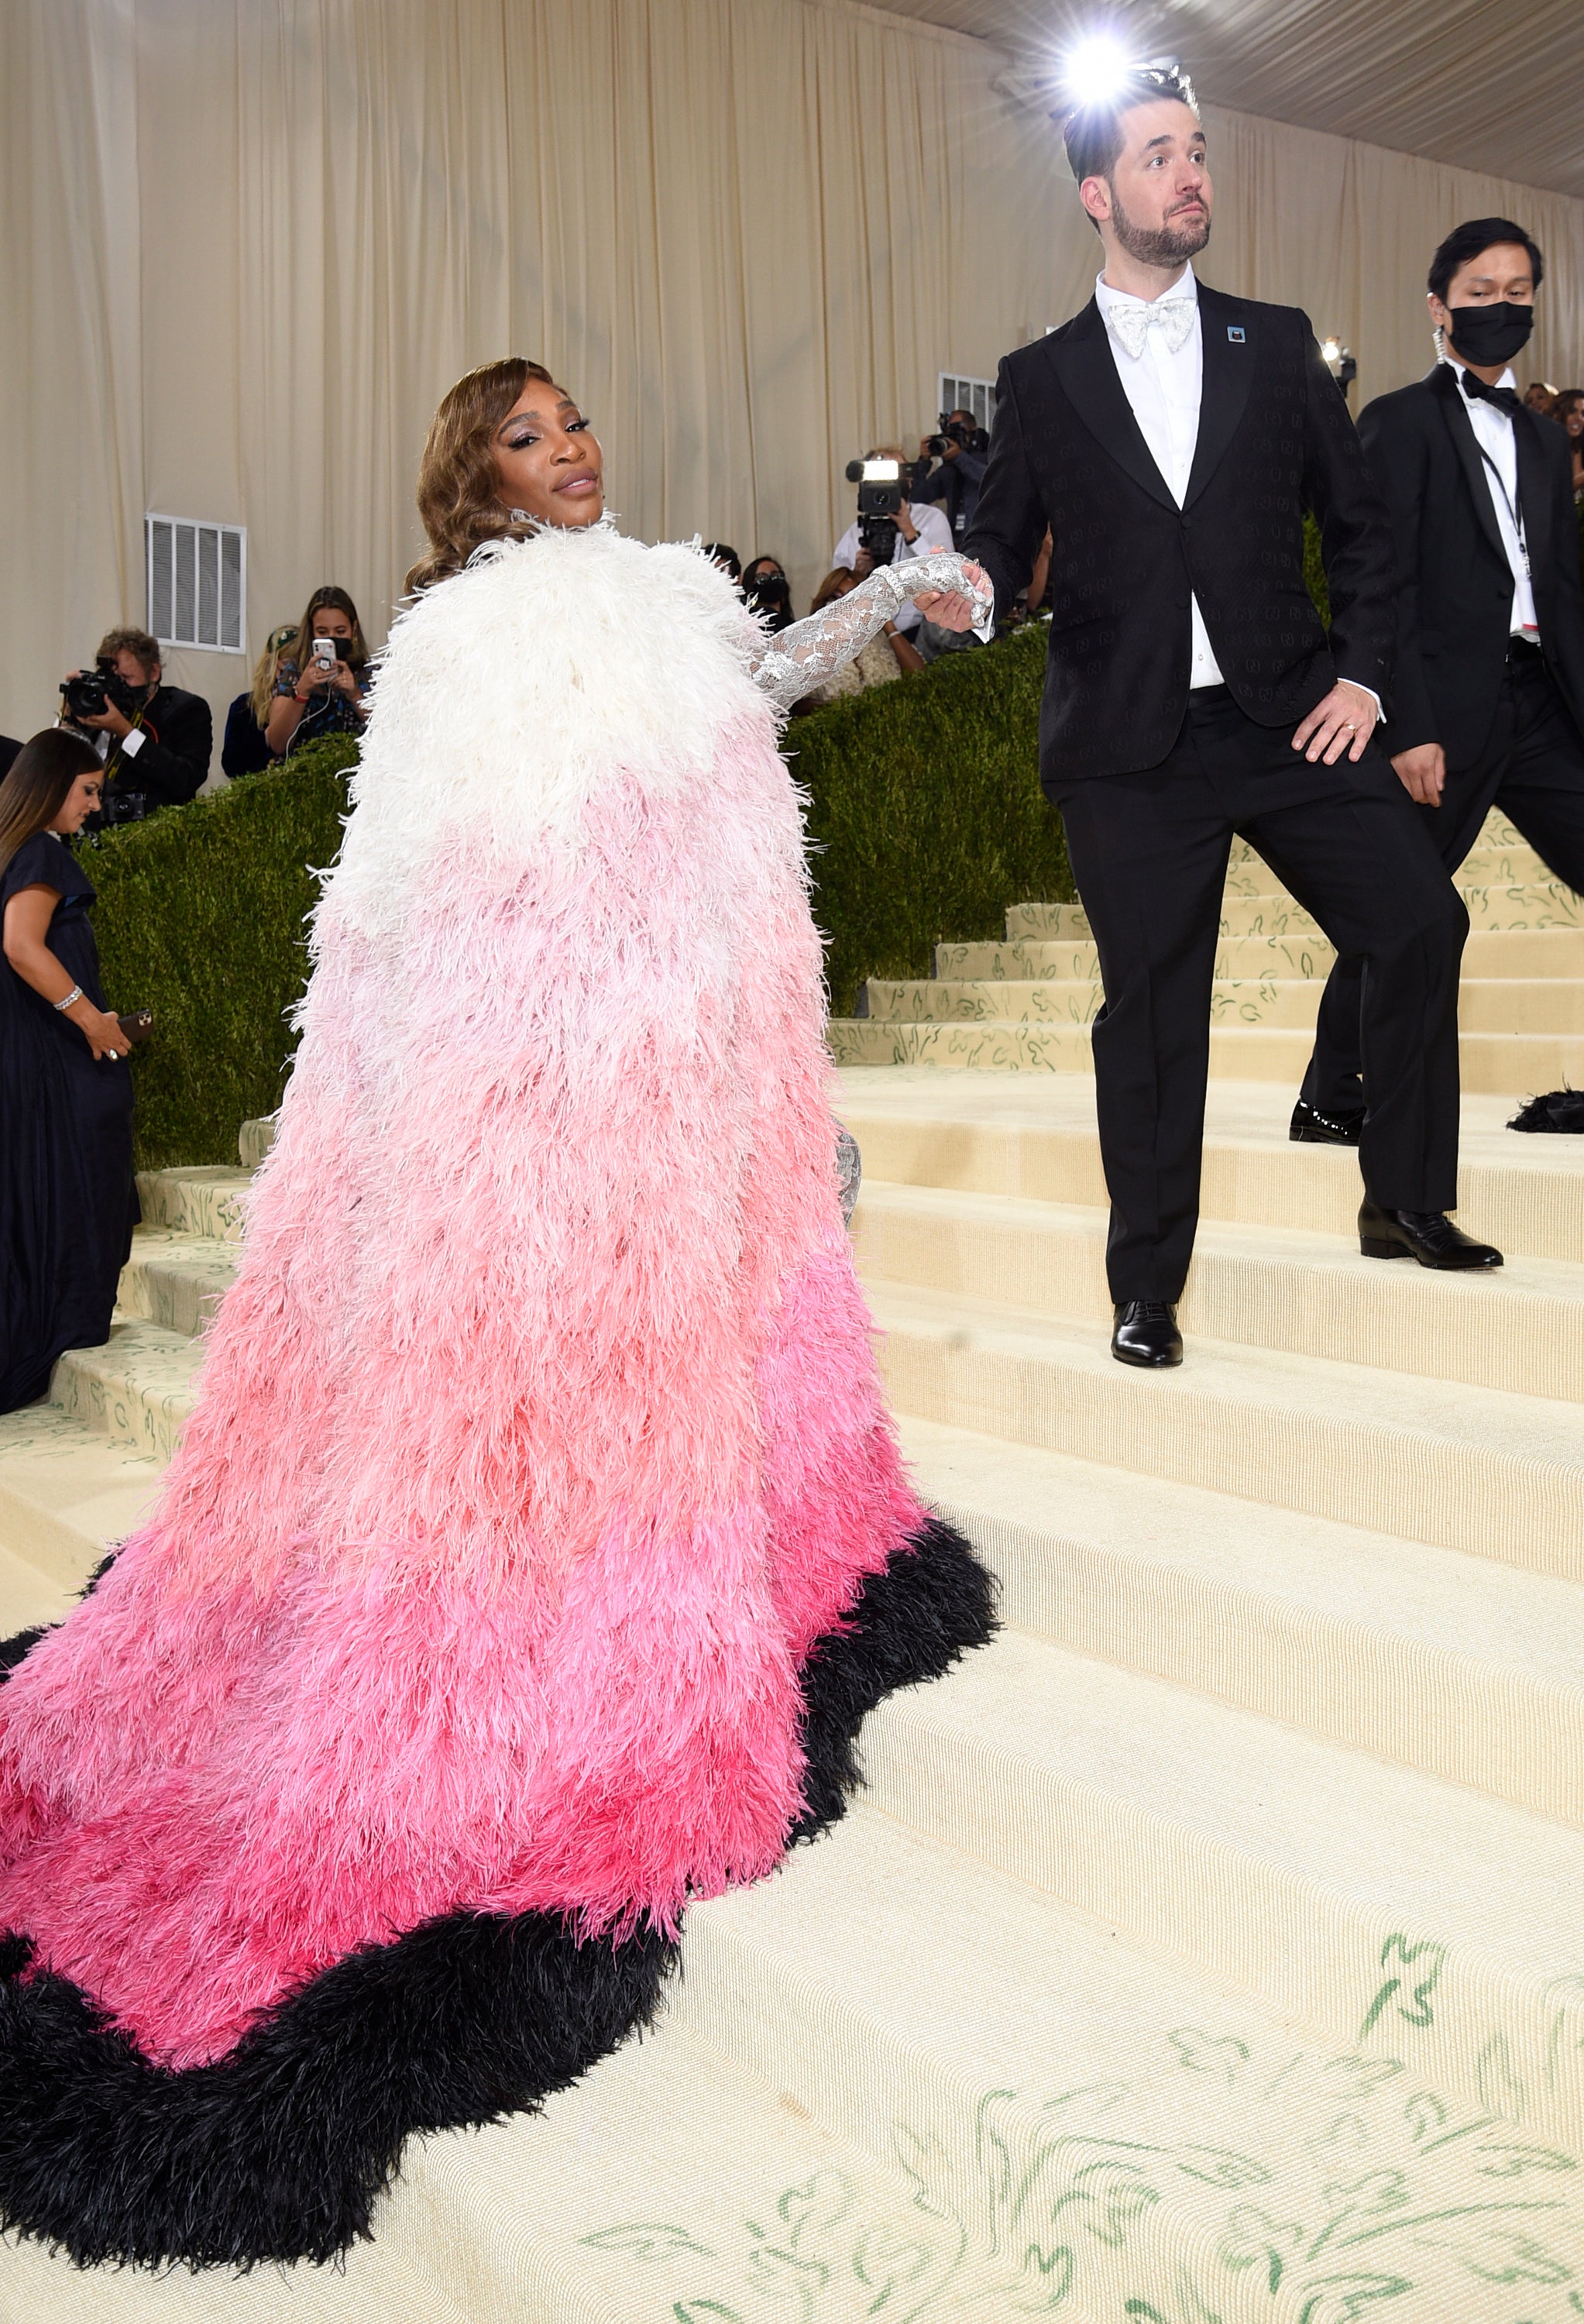 Serena Williams commanded attention at the Met Gala (Evan Agostini/Invision/AP)